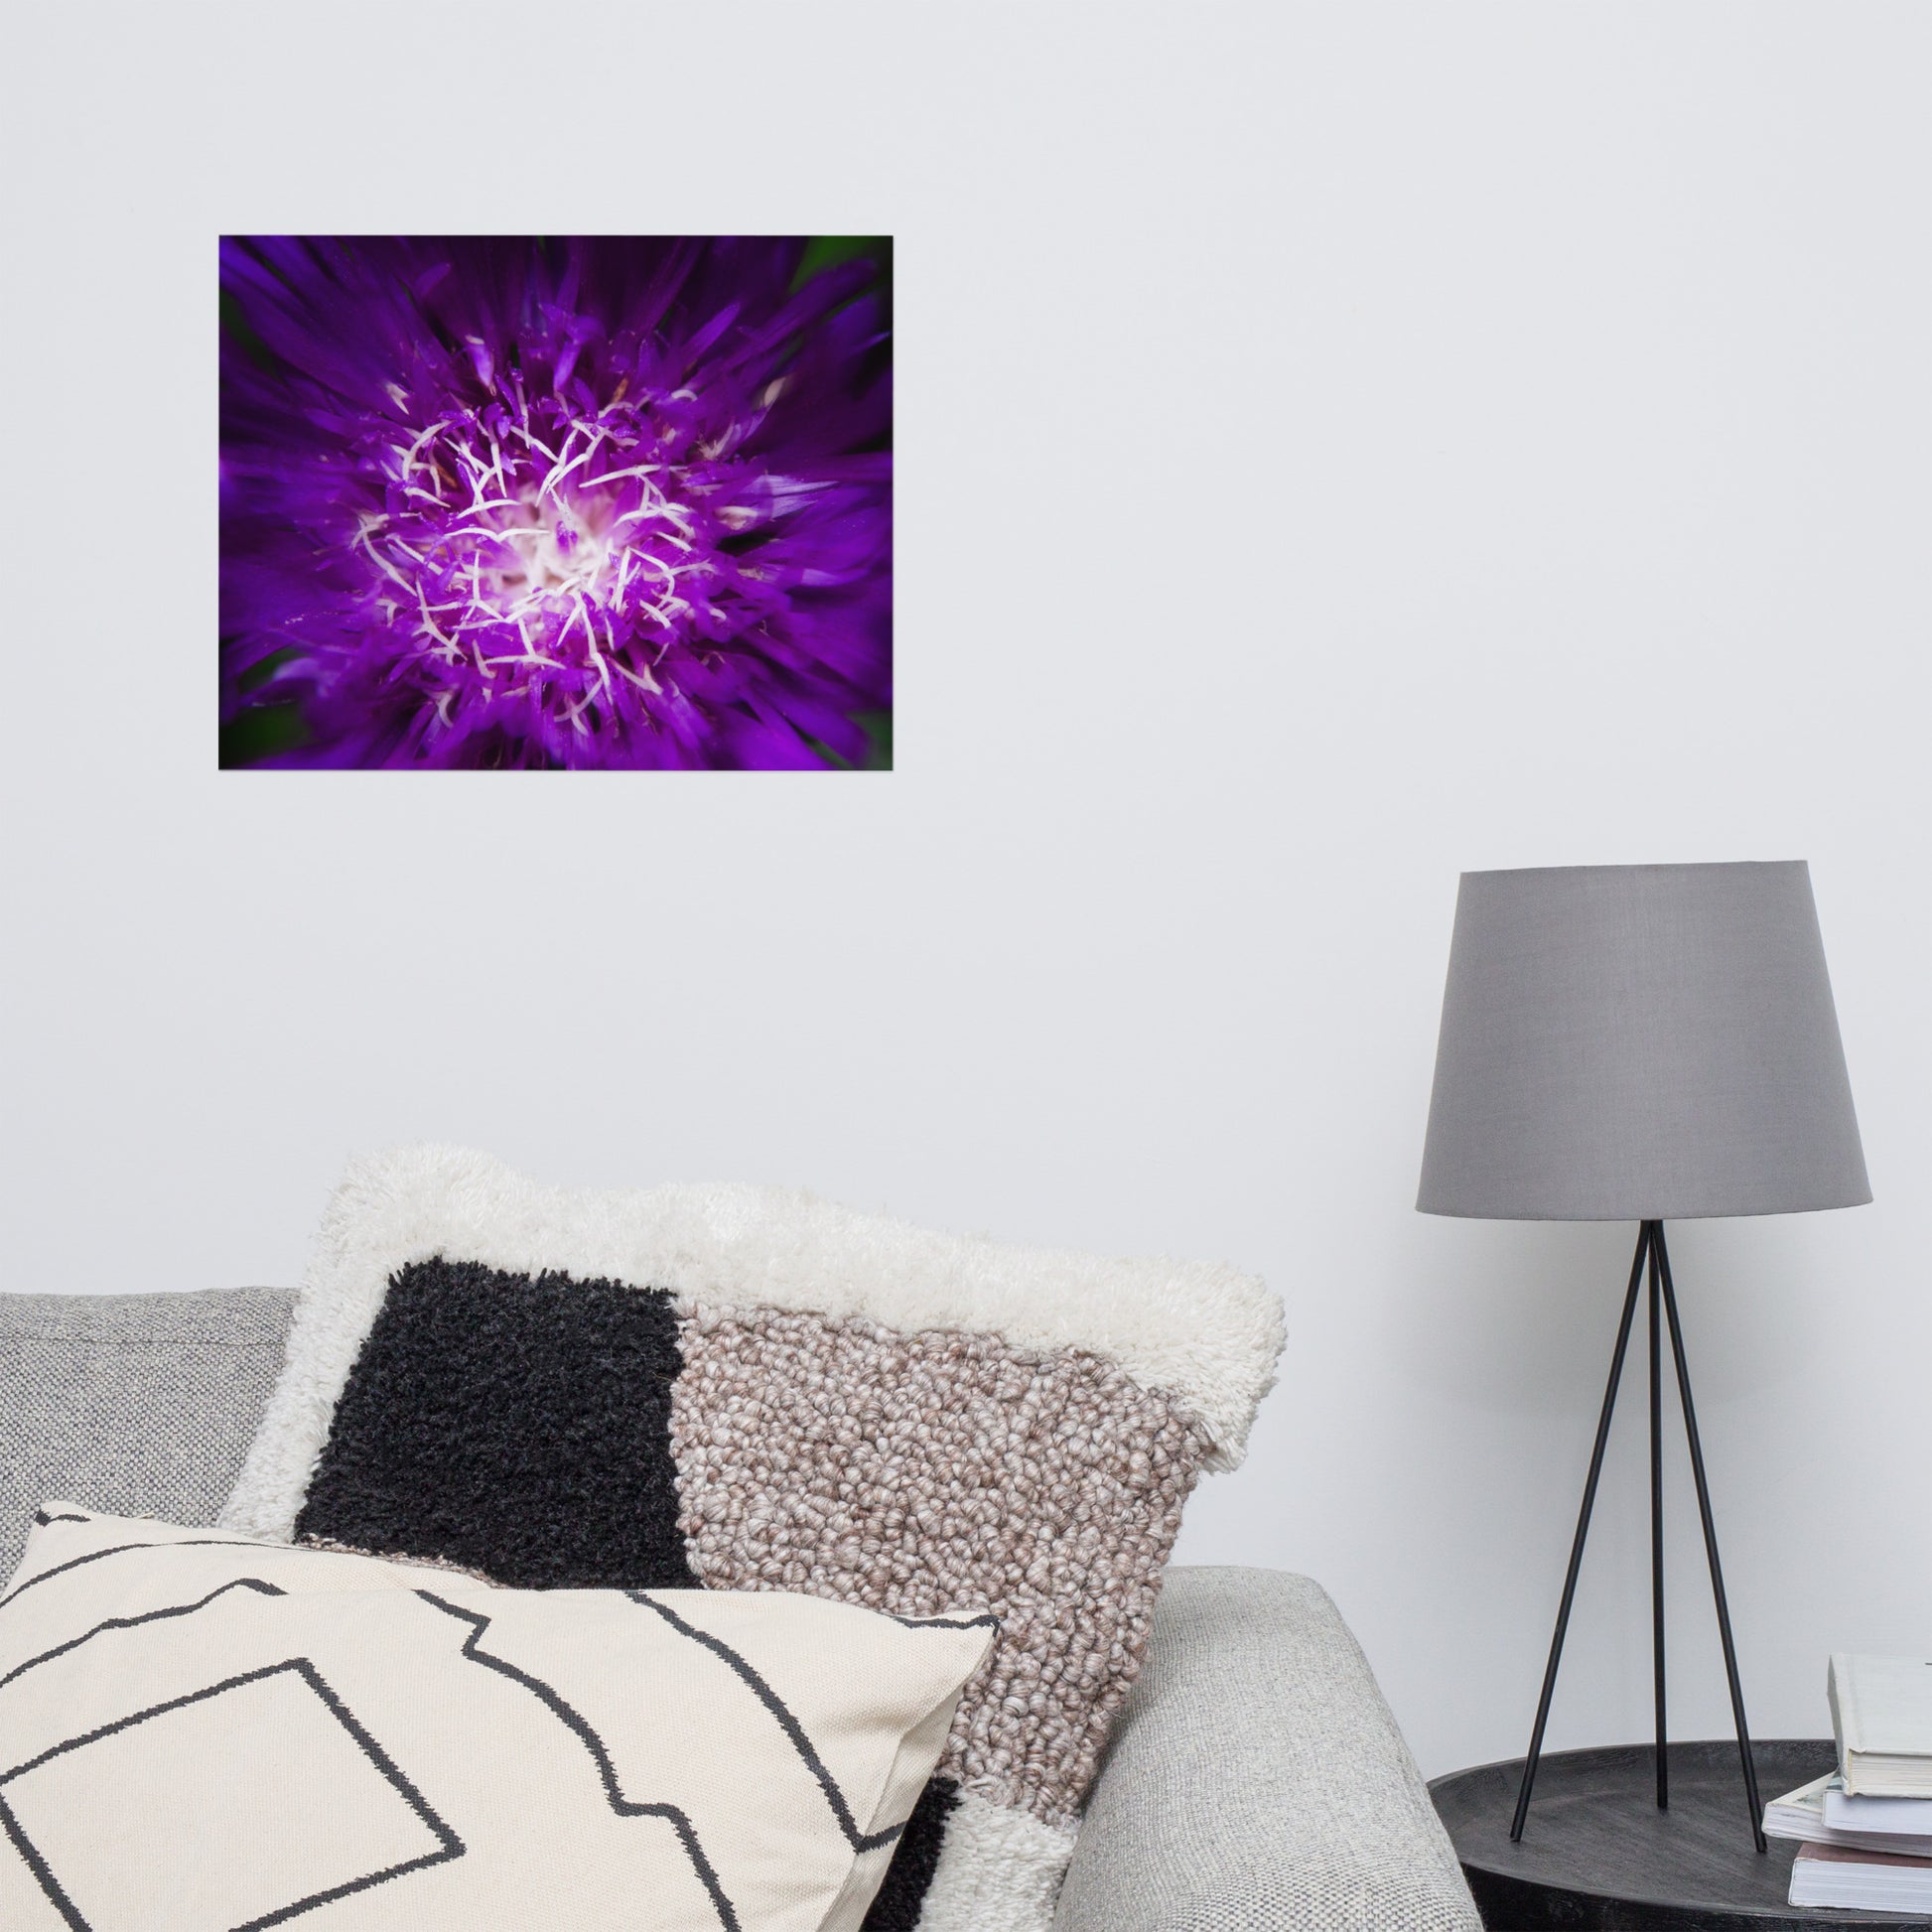 Nature Pictures For Living Room Wall: Dark Purple and White Aster Bloom Close-up - Botanical / Floral / Flora / Flowers / Nature Photograph Loose / Unframed / Frameless / Frameable Wall Art Print - Artwork